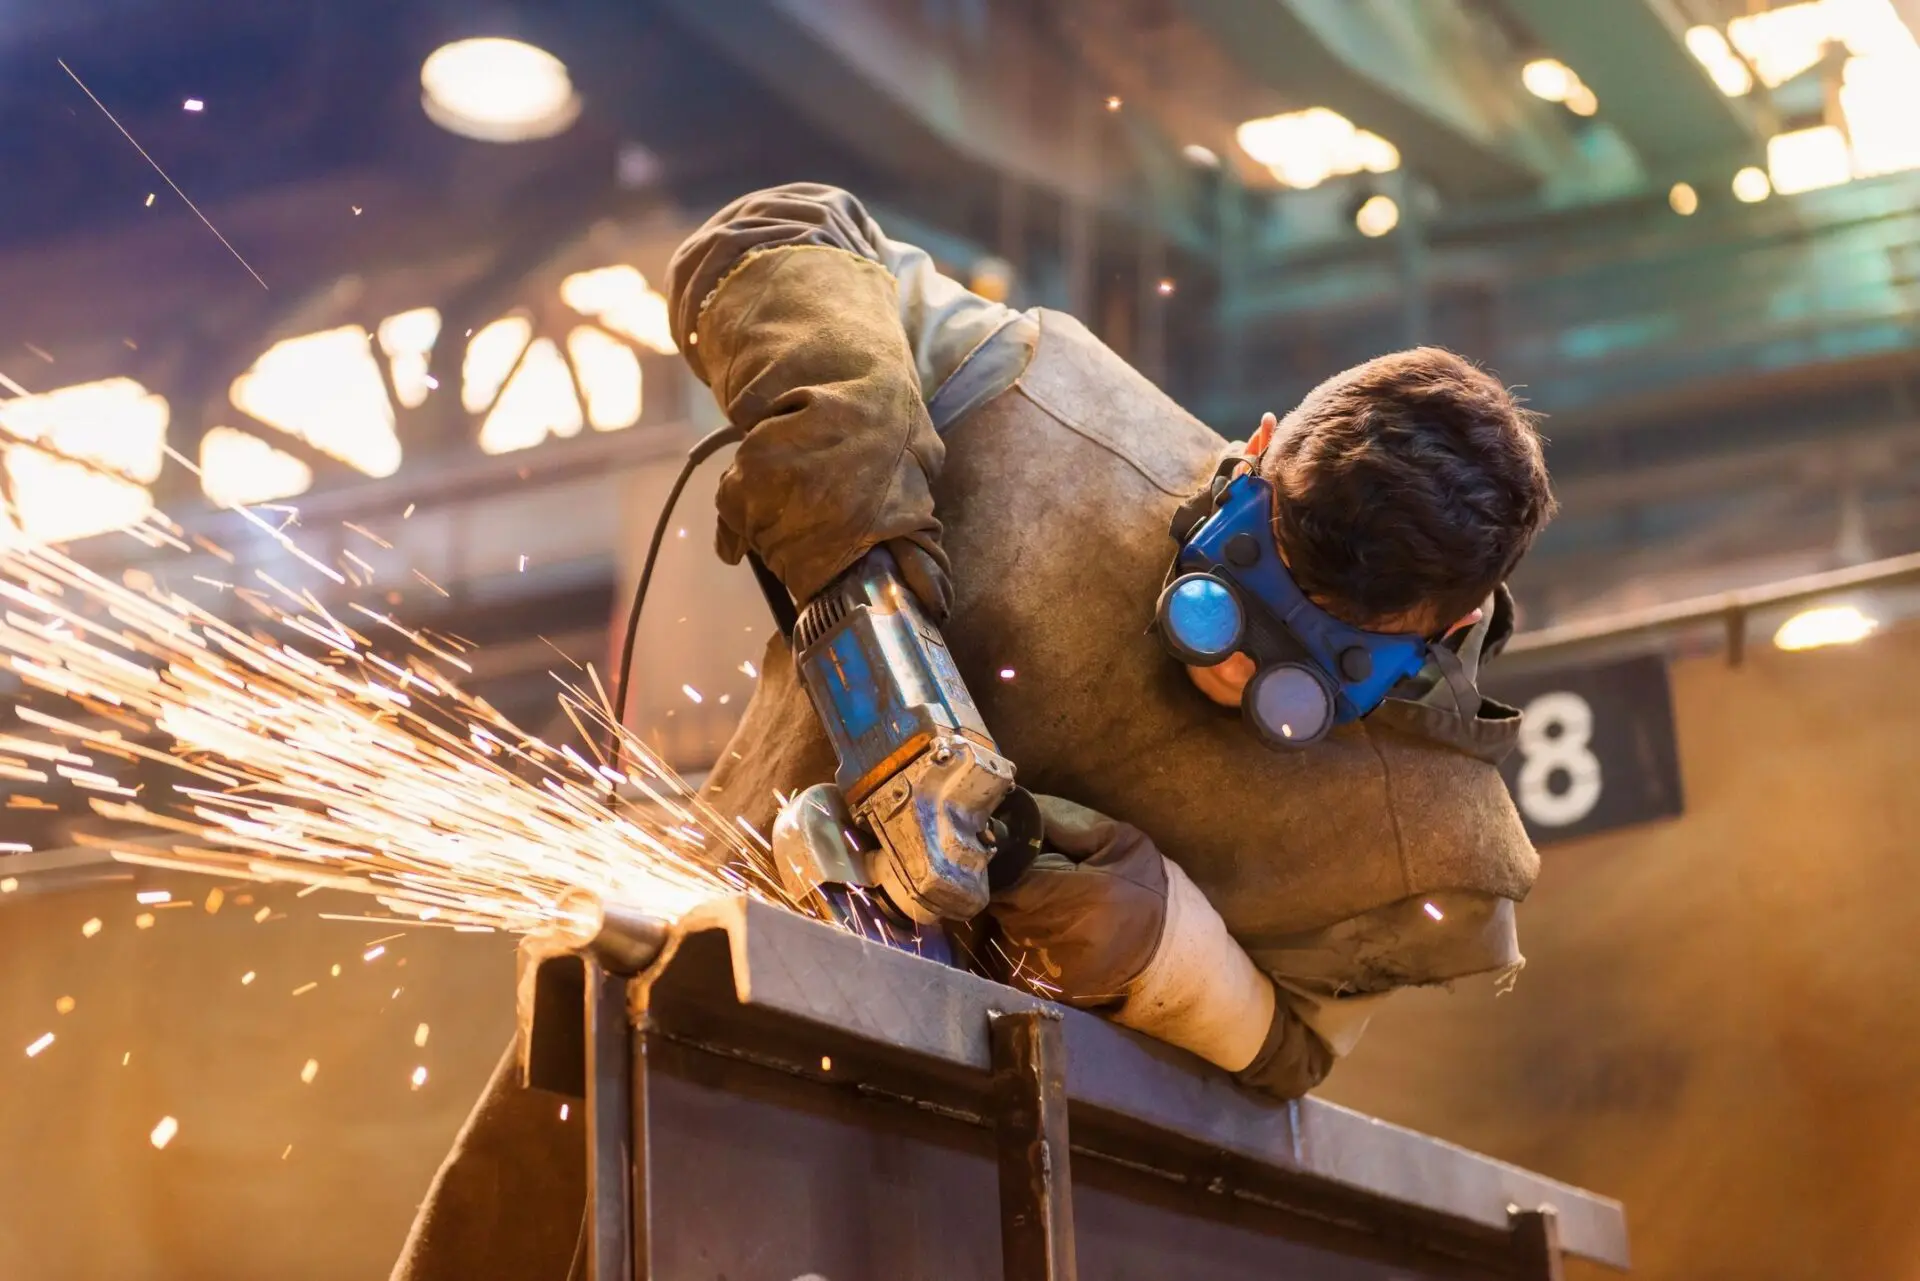 A man wearing protective gear and using an angle grinder.